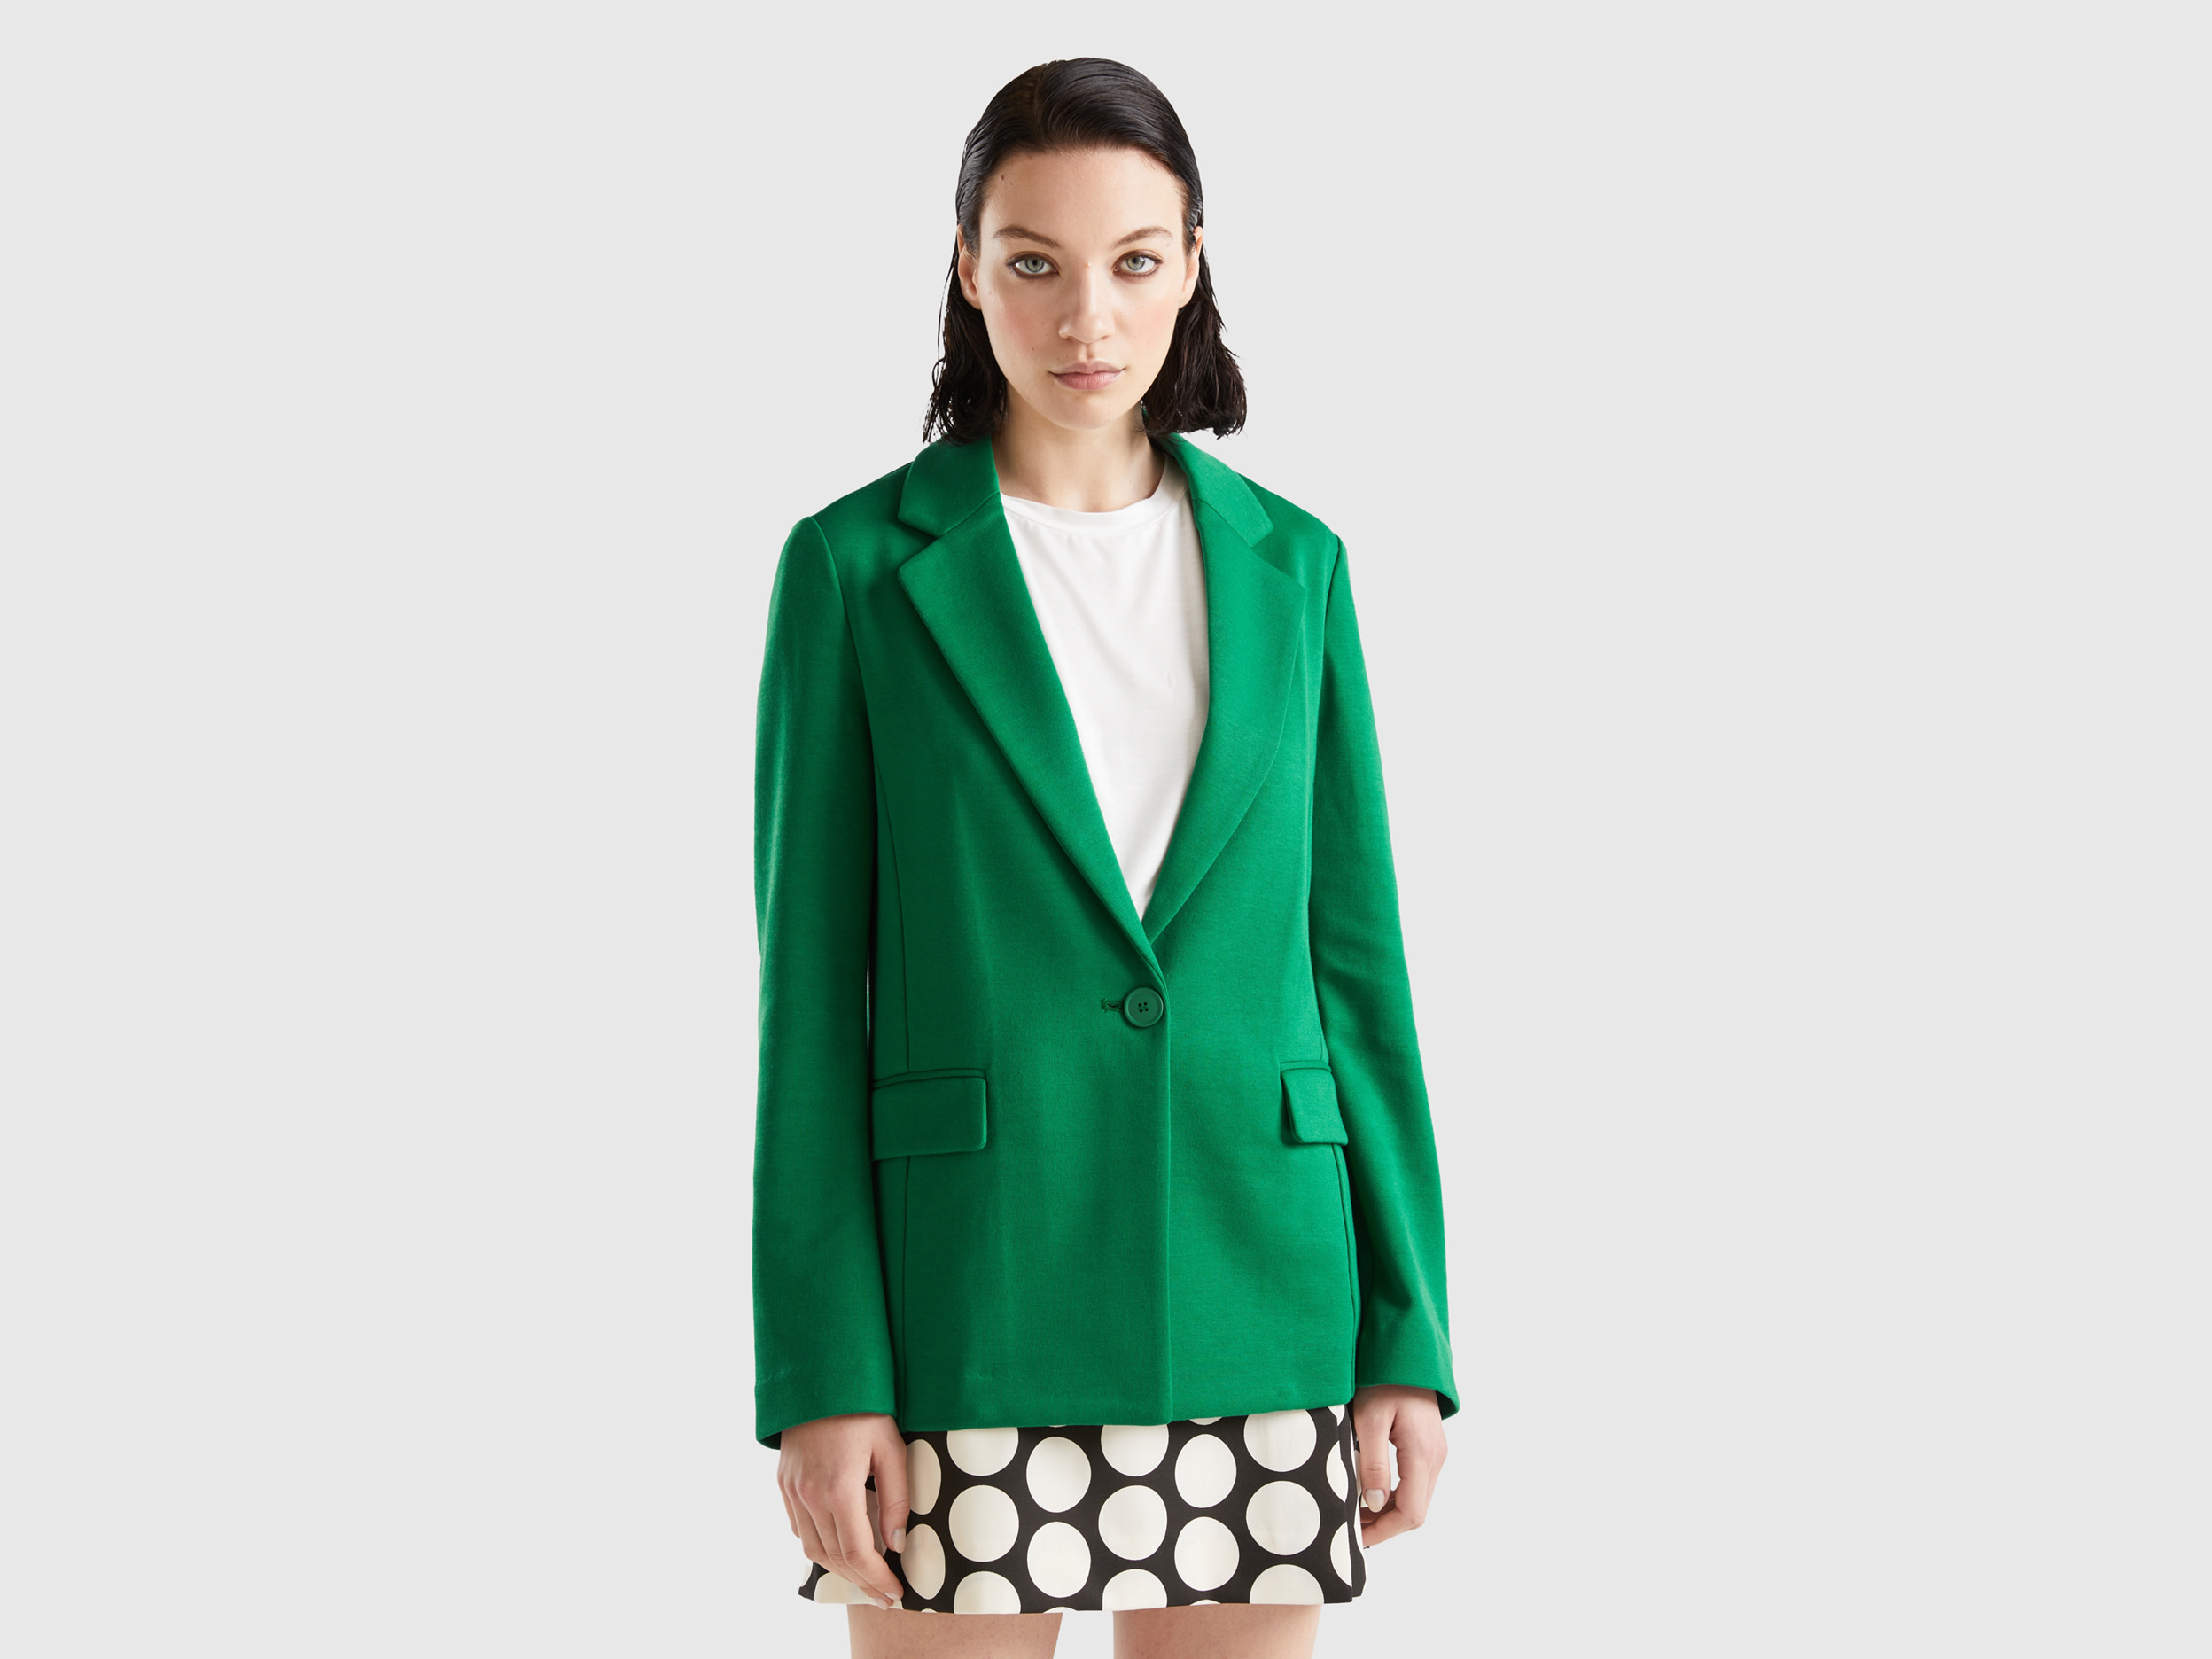 Benetton, Fitted Blazer With Pockets, size 8, Green, Women